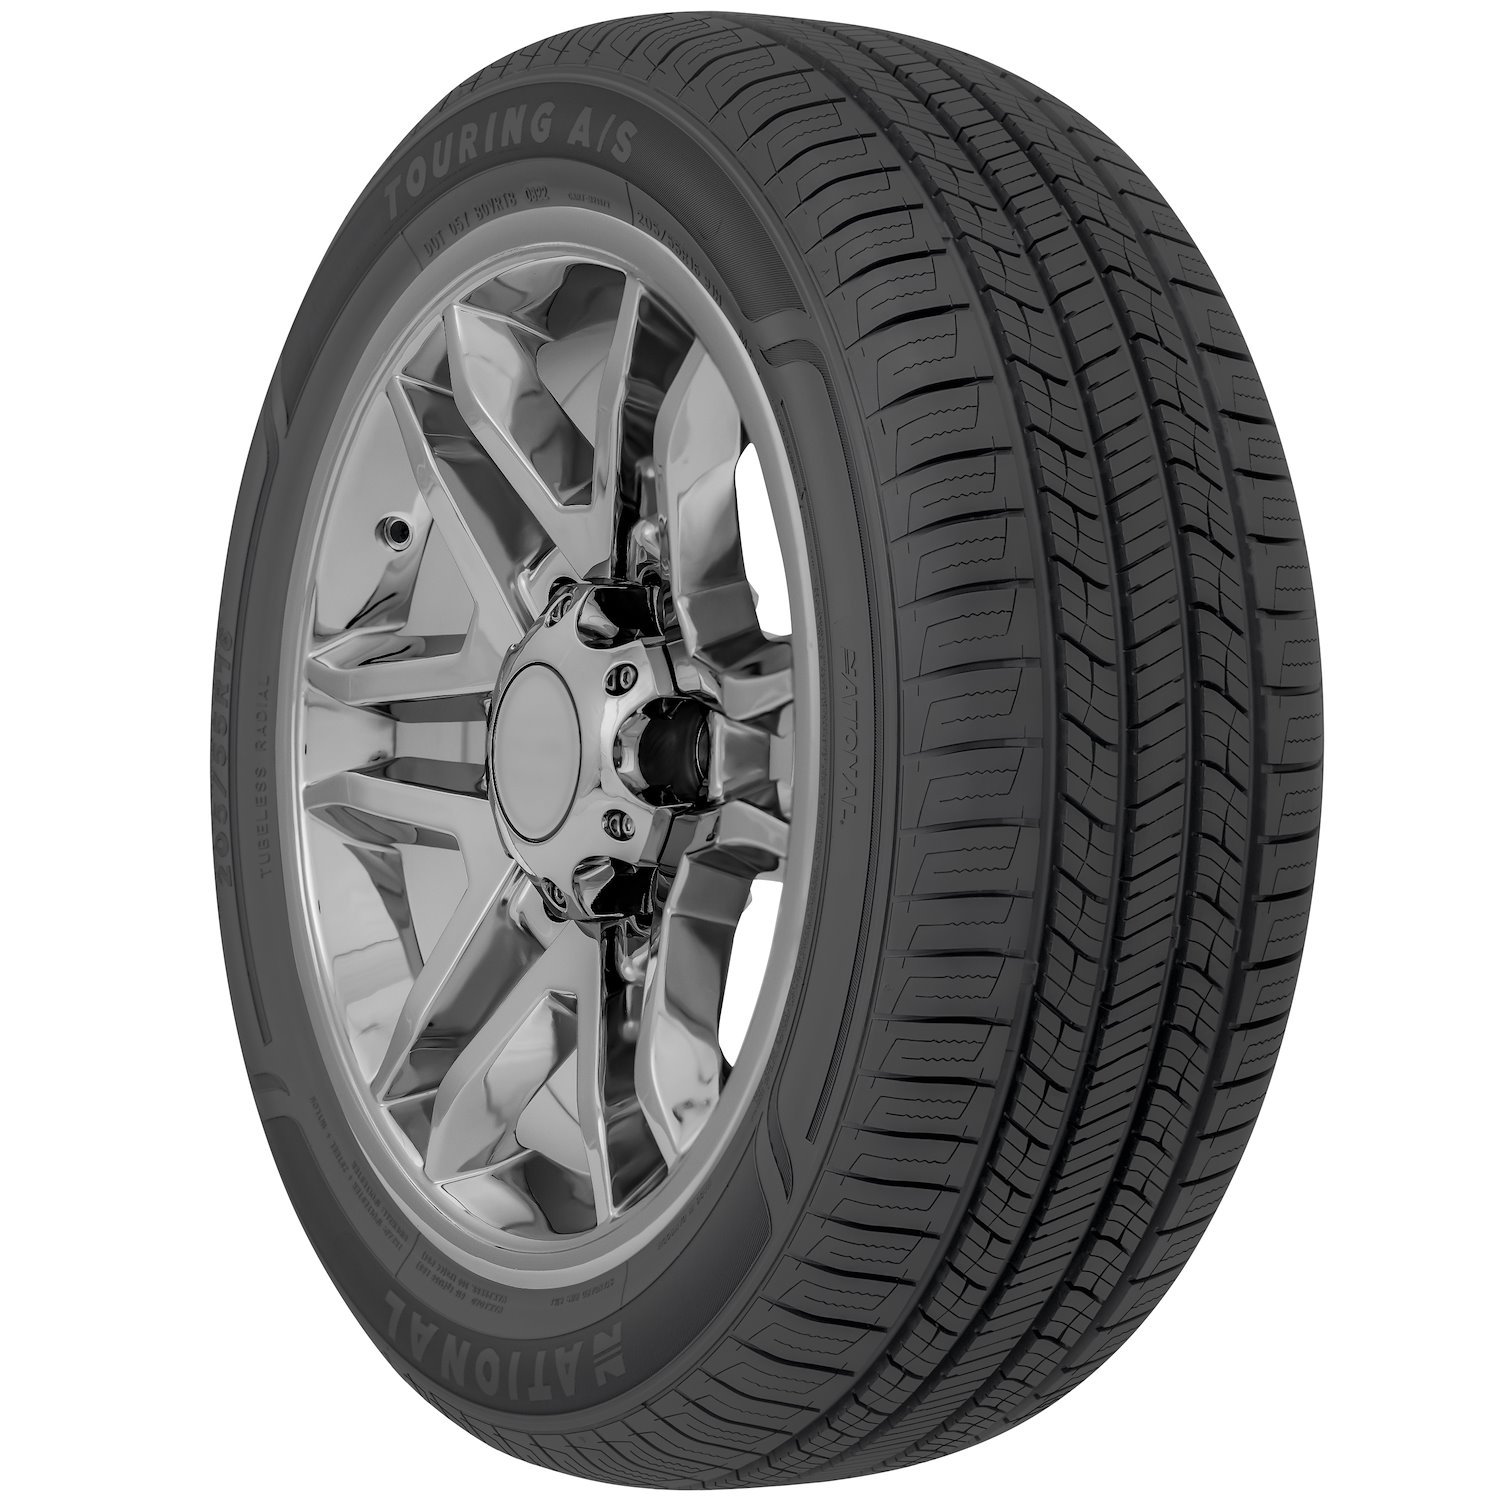 NLR24 Touring A/S Tire, 235/55R19